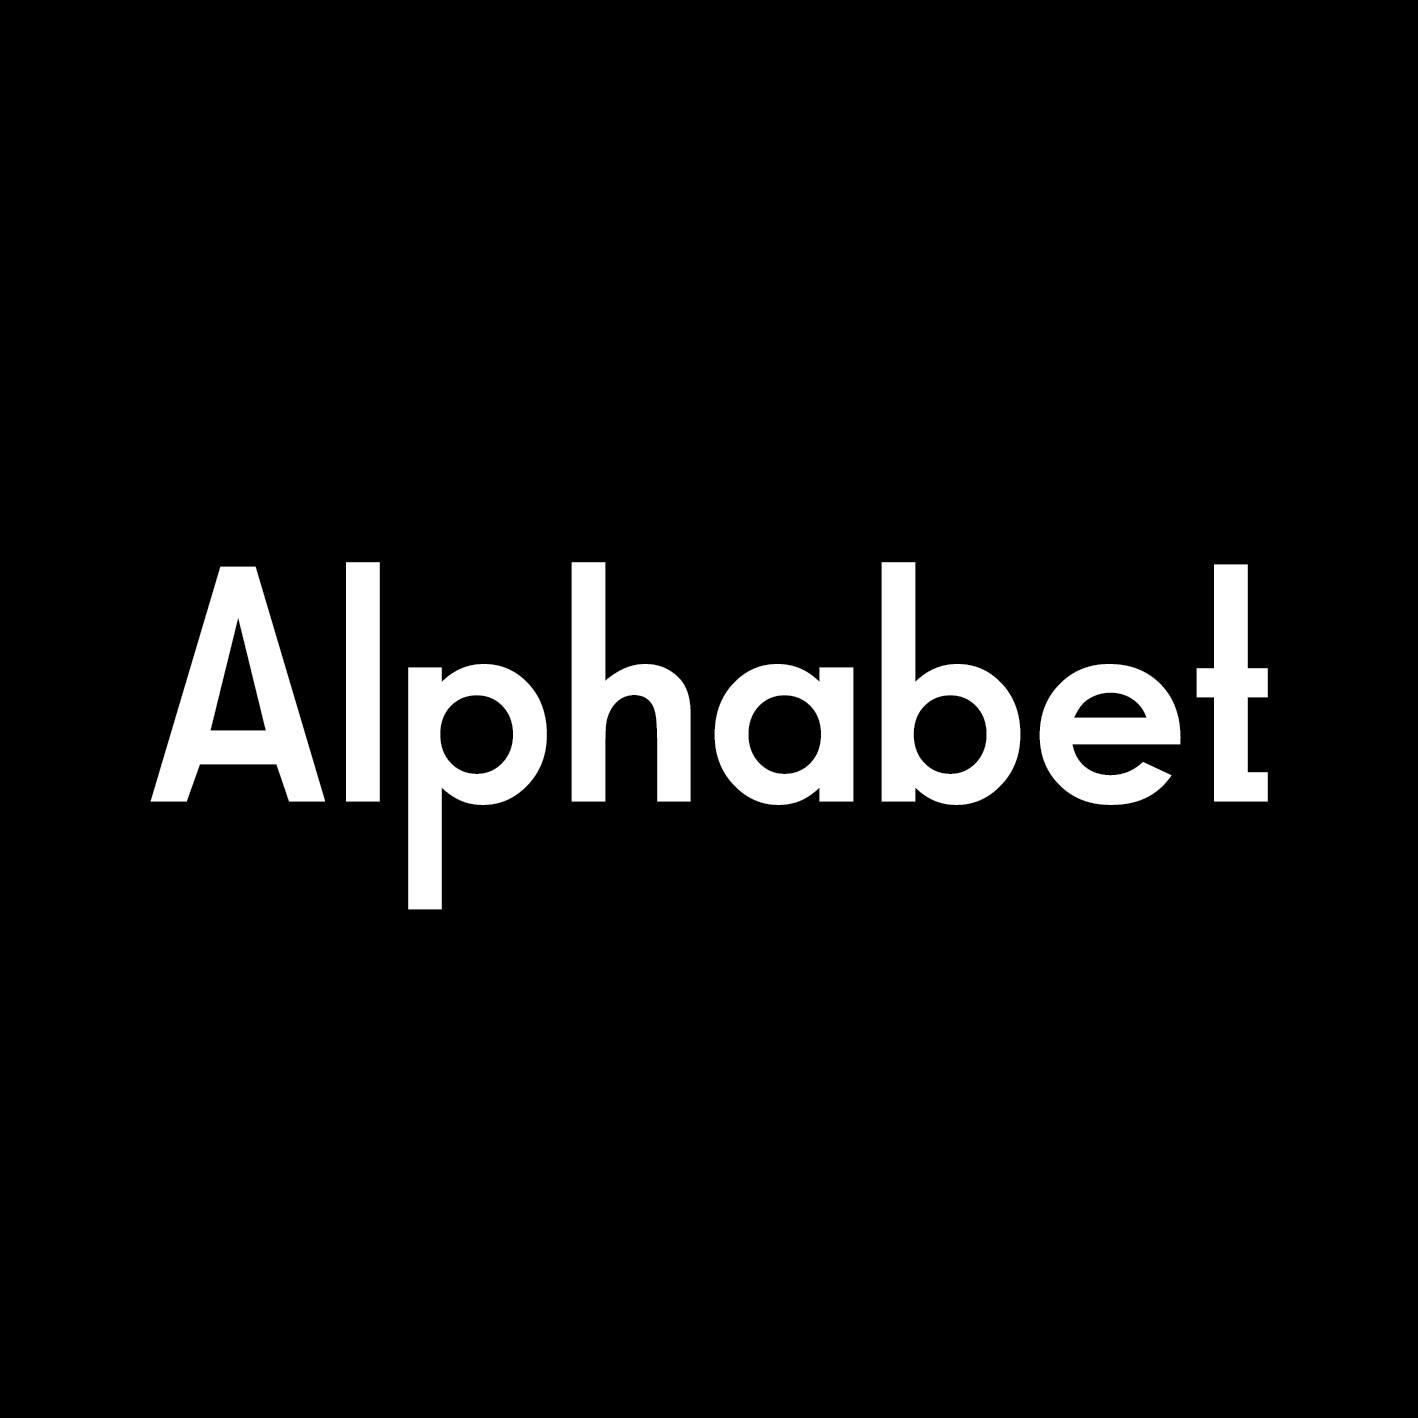 Cover image of this place Alphabet